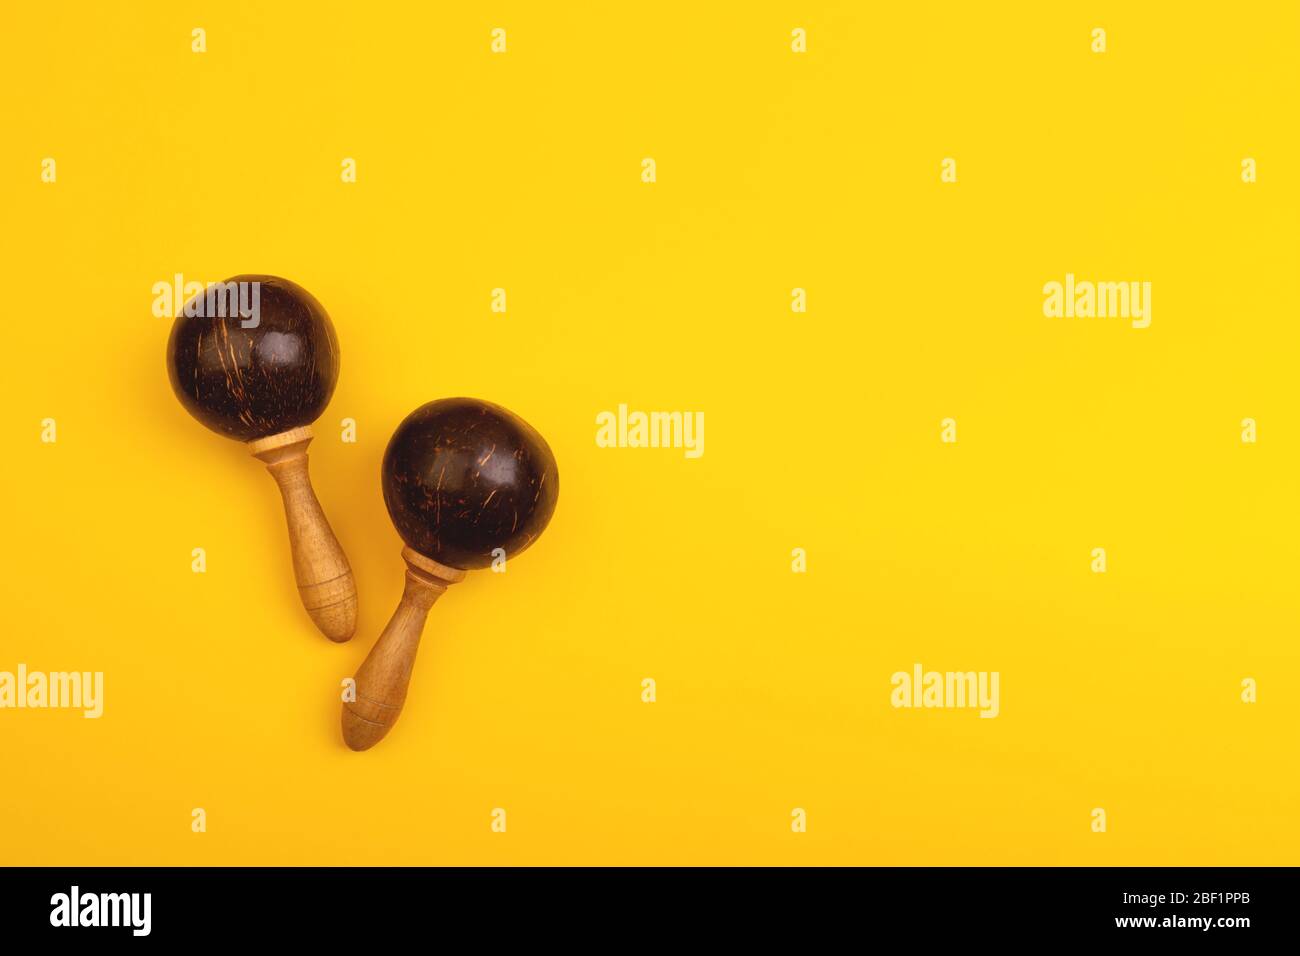 Two mexican maracas isolated on yellow background. Traditional folk musical instruments. Elements of national culture. Flat lay. Latin music. Stock Photo